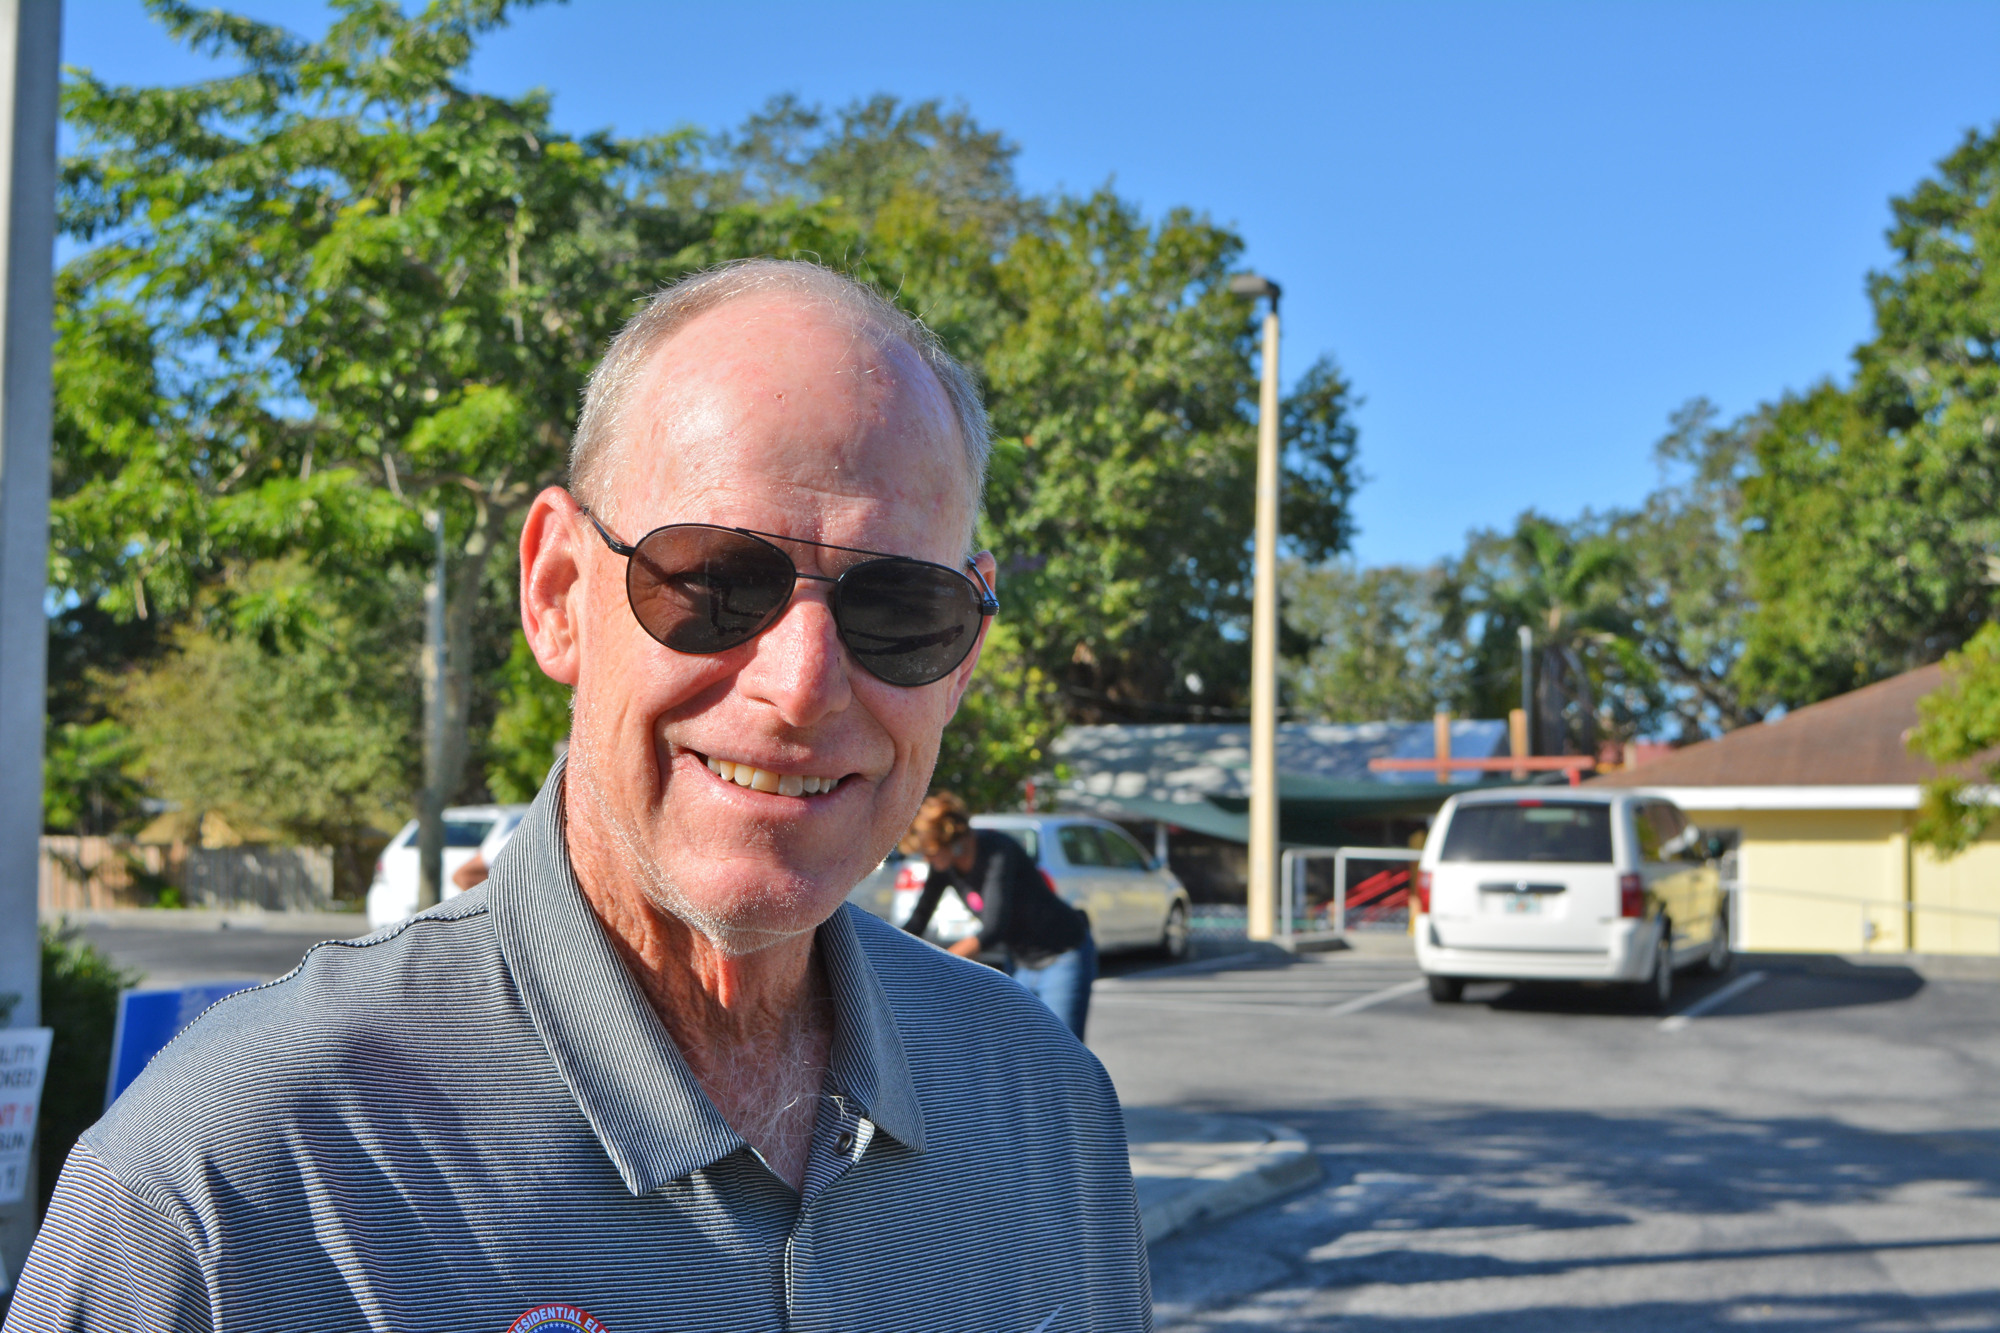 Phil Block was one of at least 80 voters who cast ballots at Precinct 209 between 9 a.m. and 10 a.m.